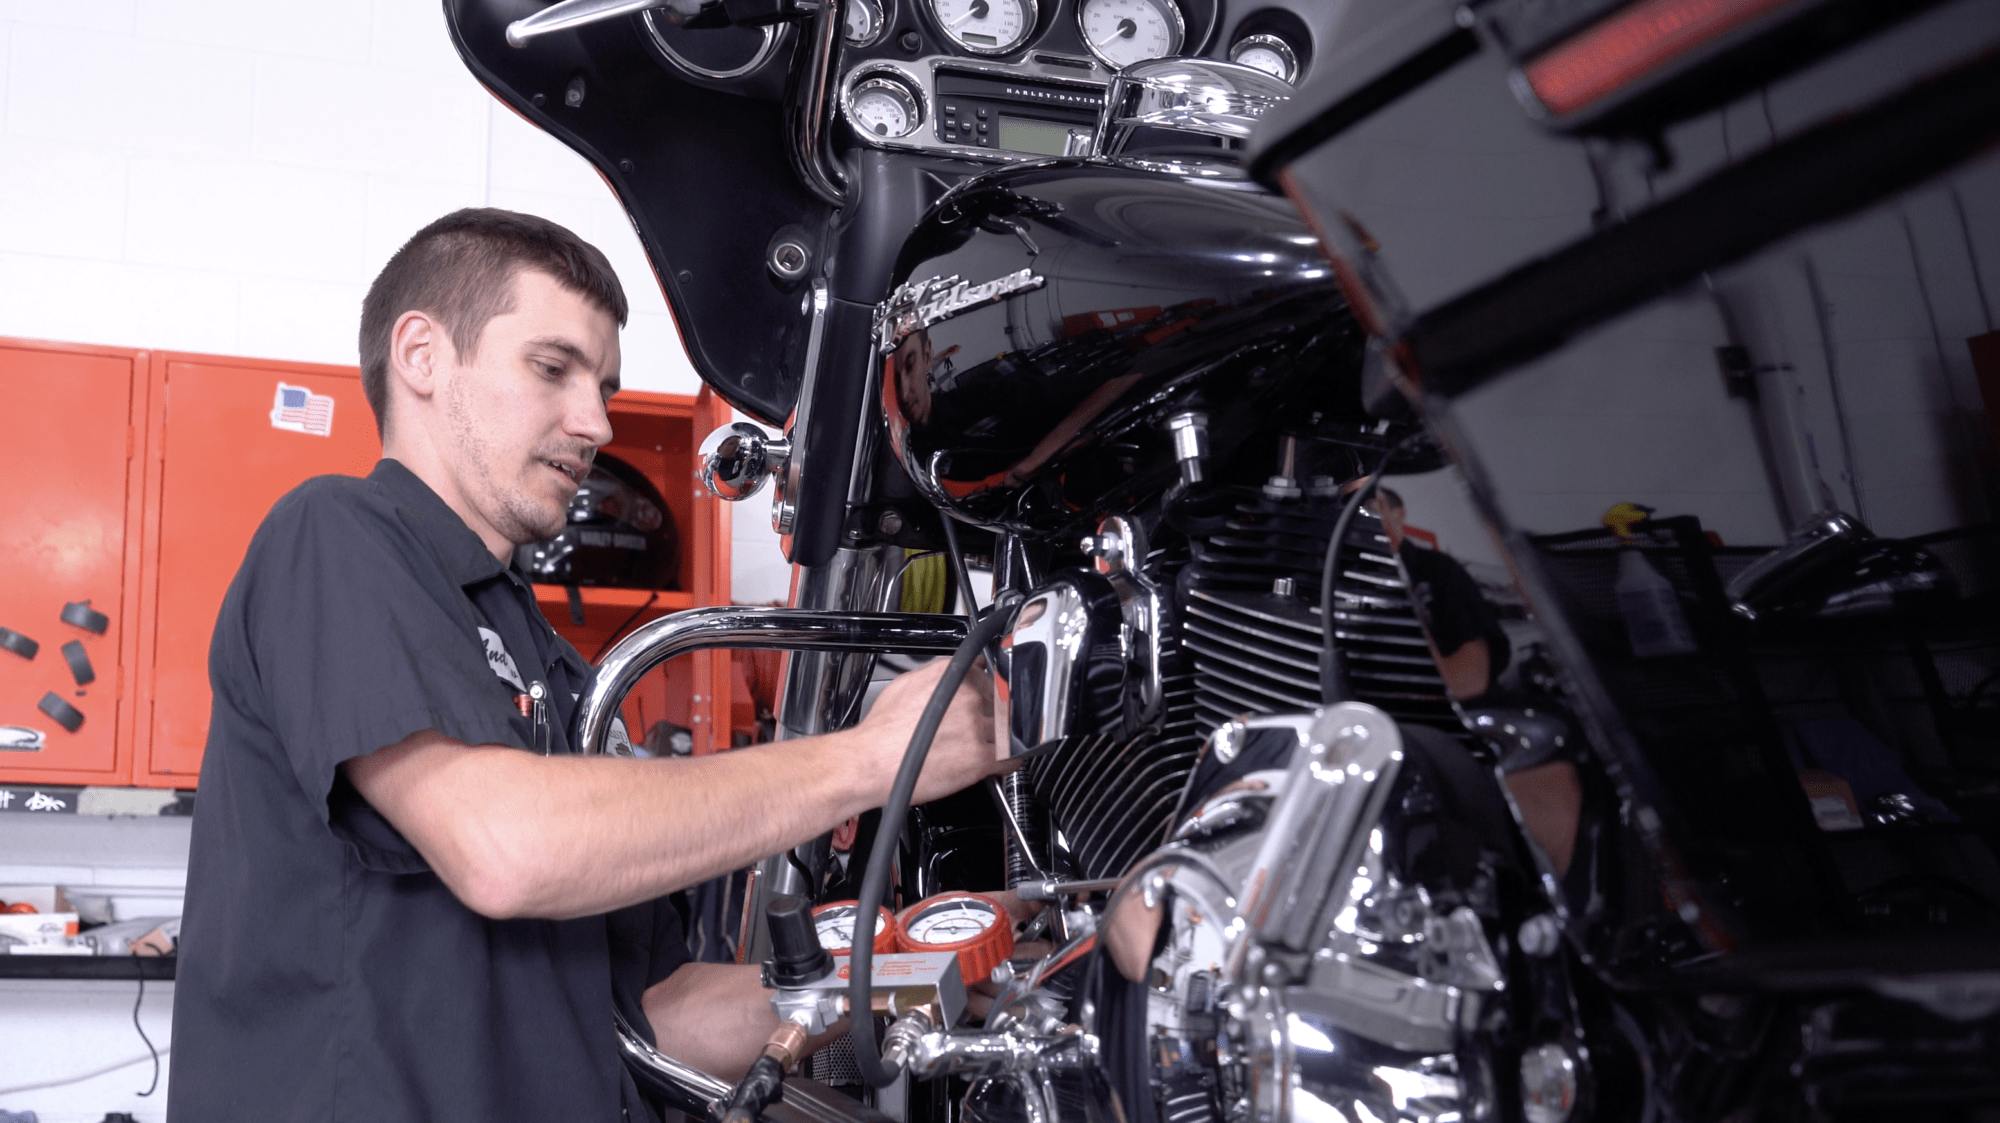 Motorcycle technician fixing a motorcycle